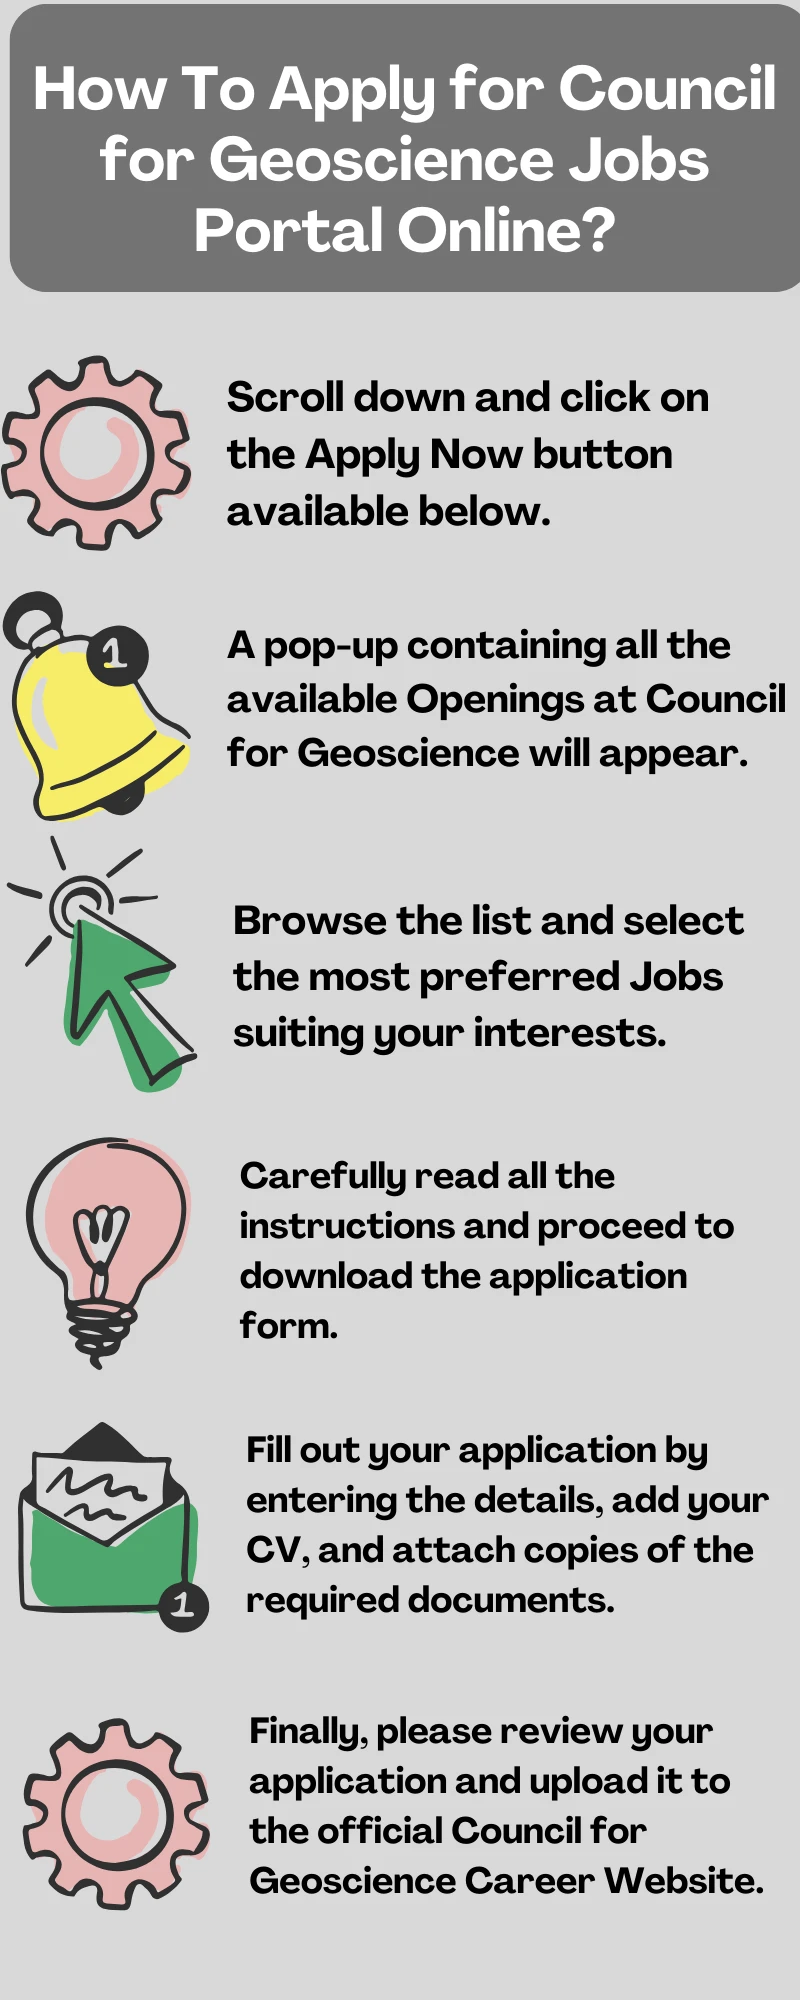 How To Apply for Council for Geoscience Jobs Portal Online?